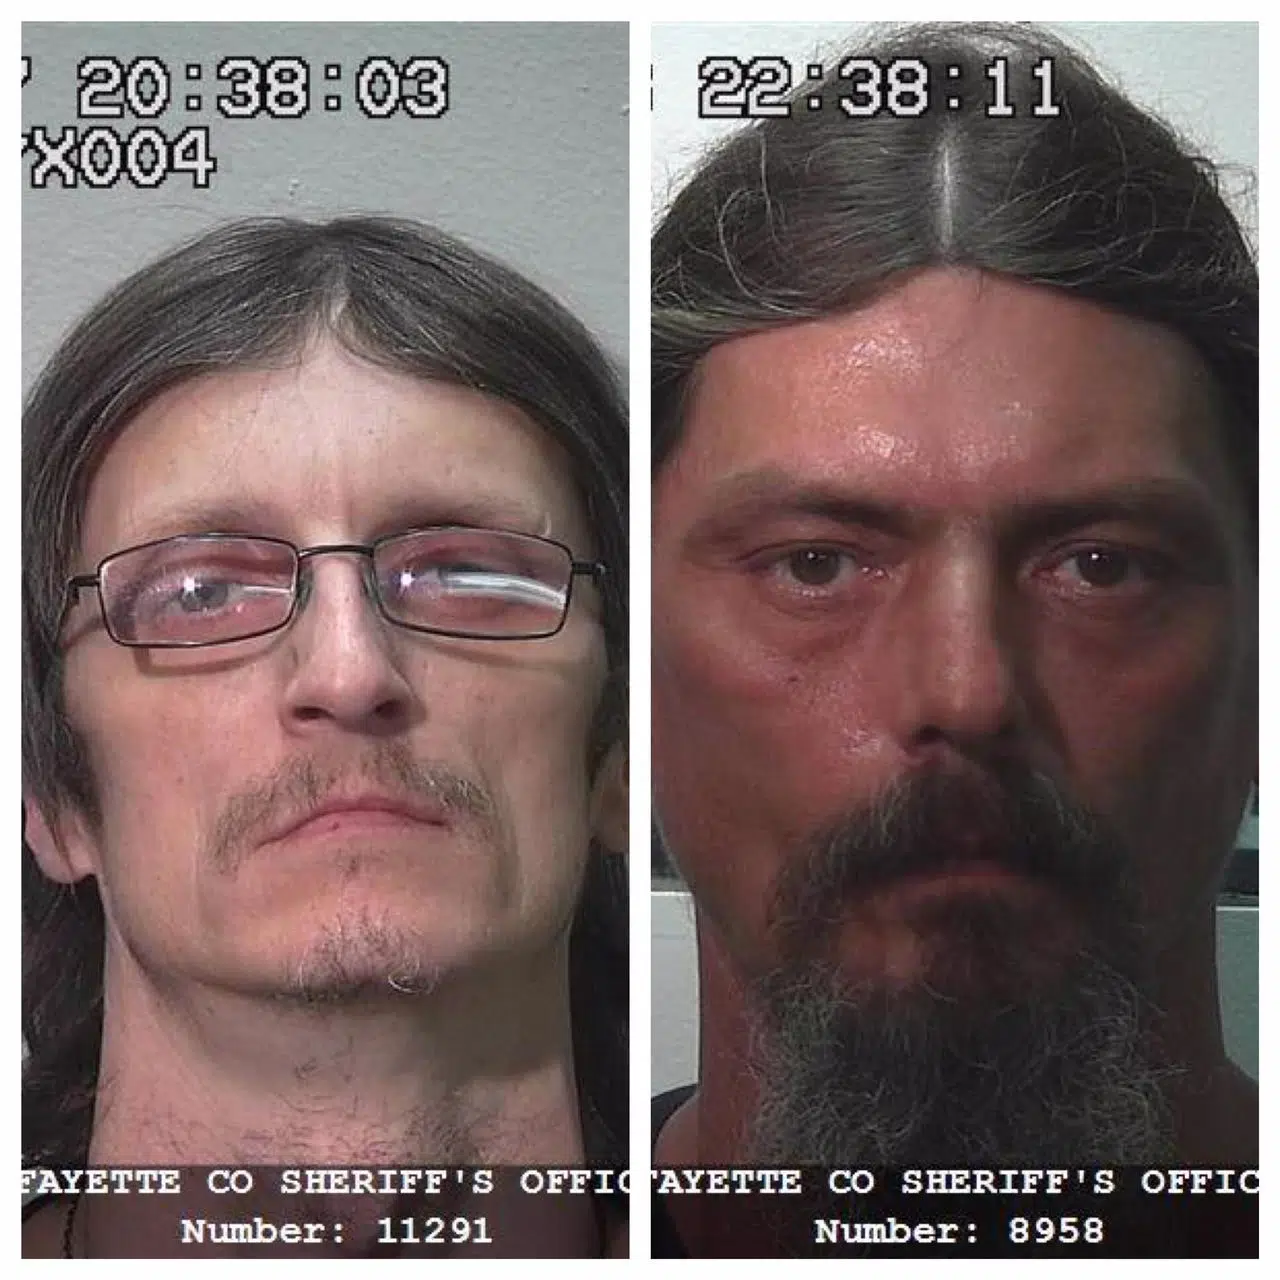 Vandalia Men Officially Charged With Burglary in Fayette County Court